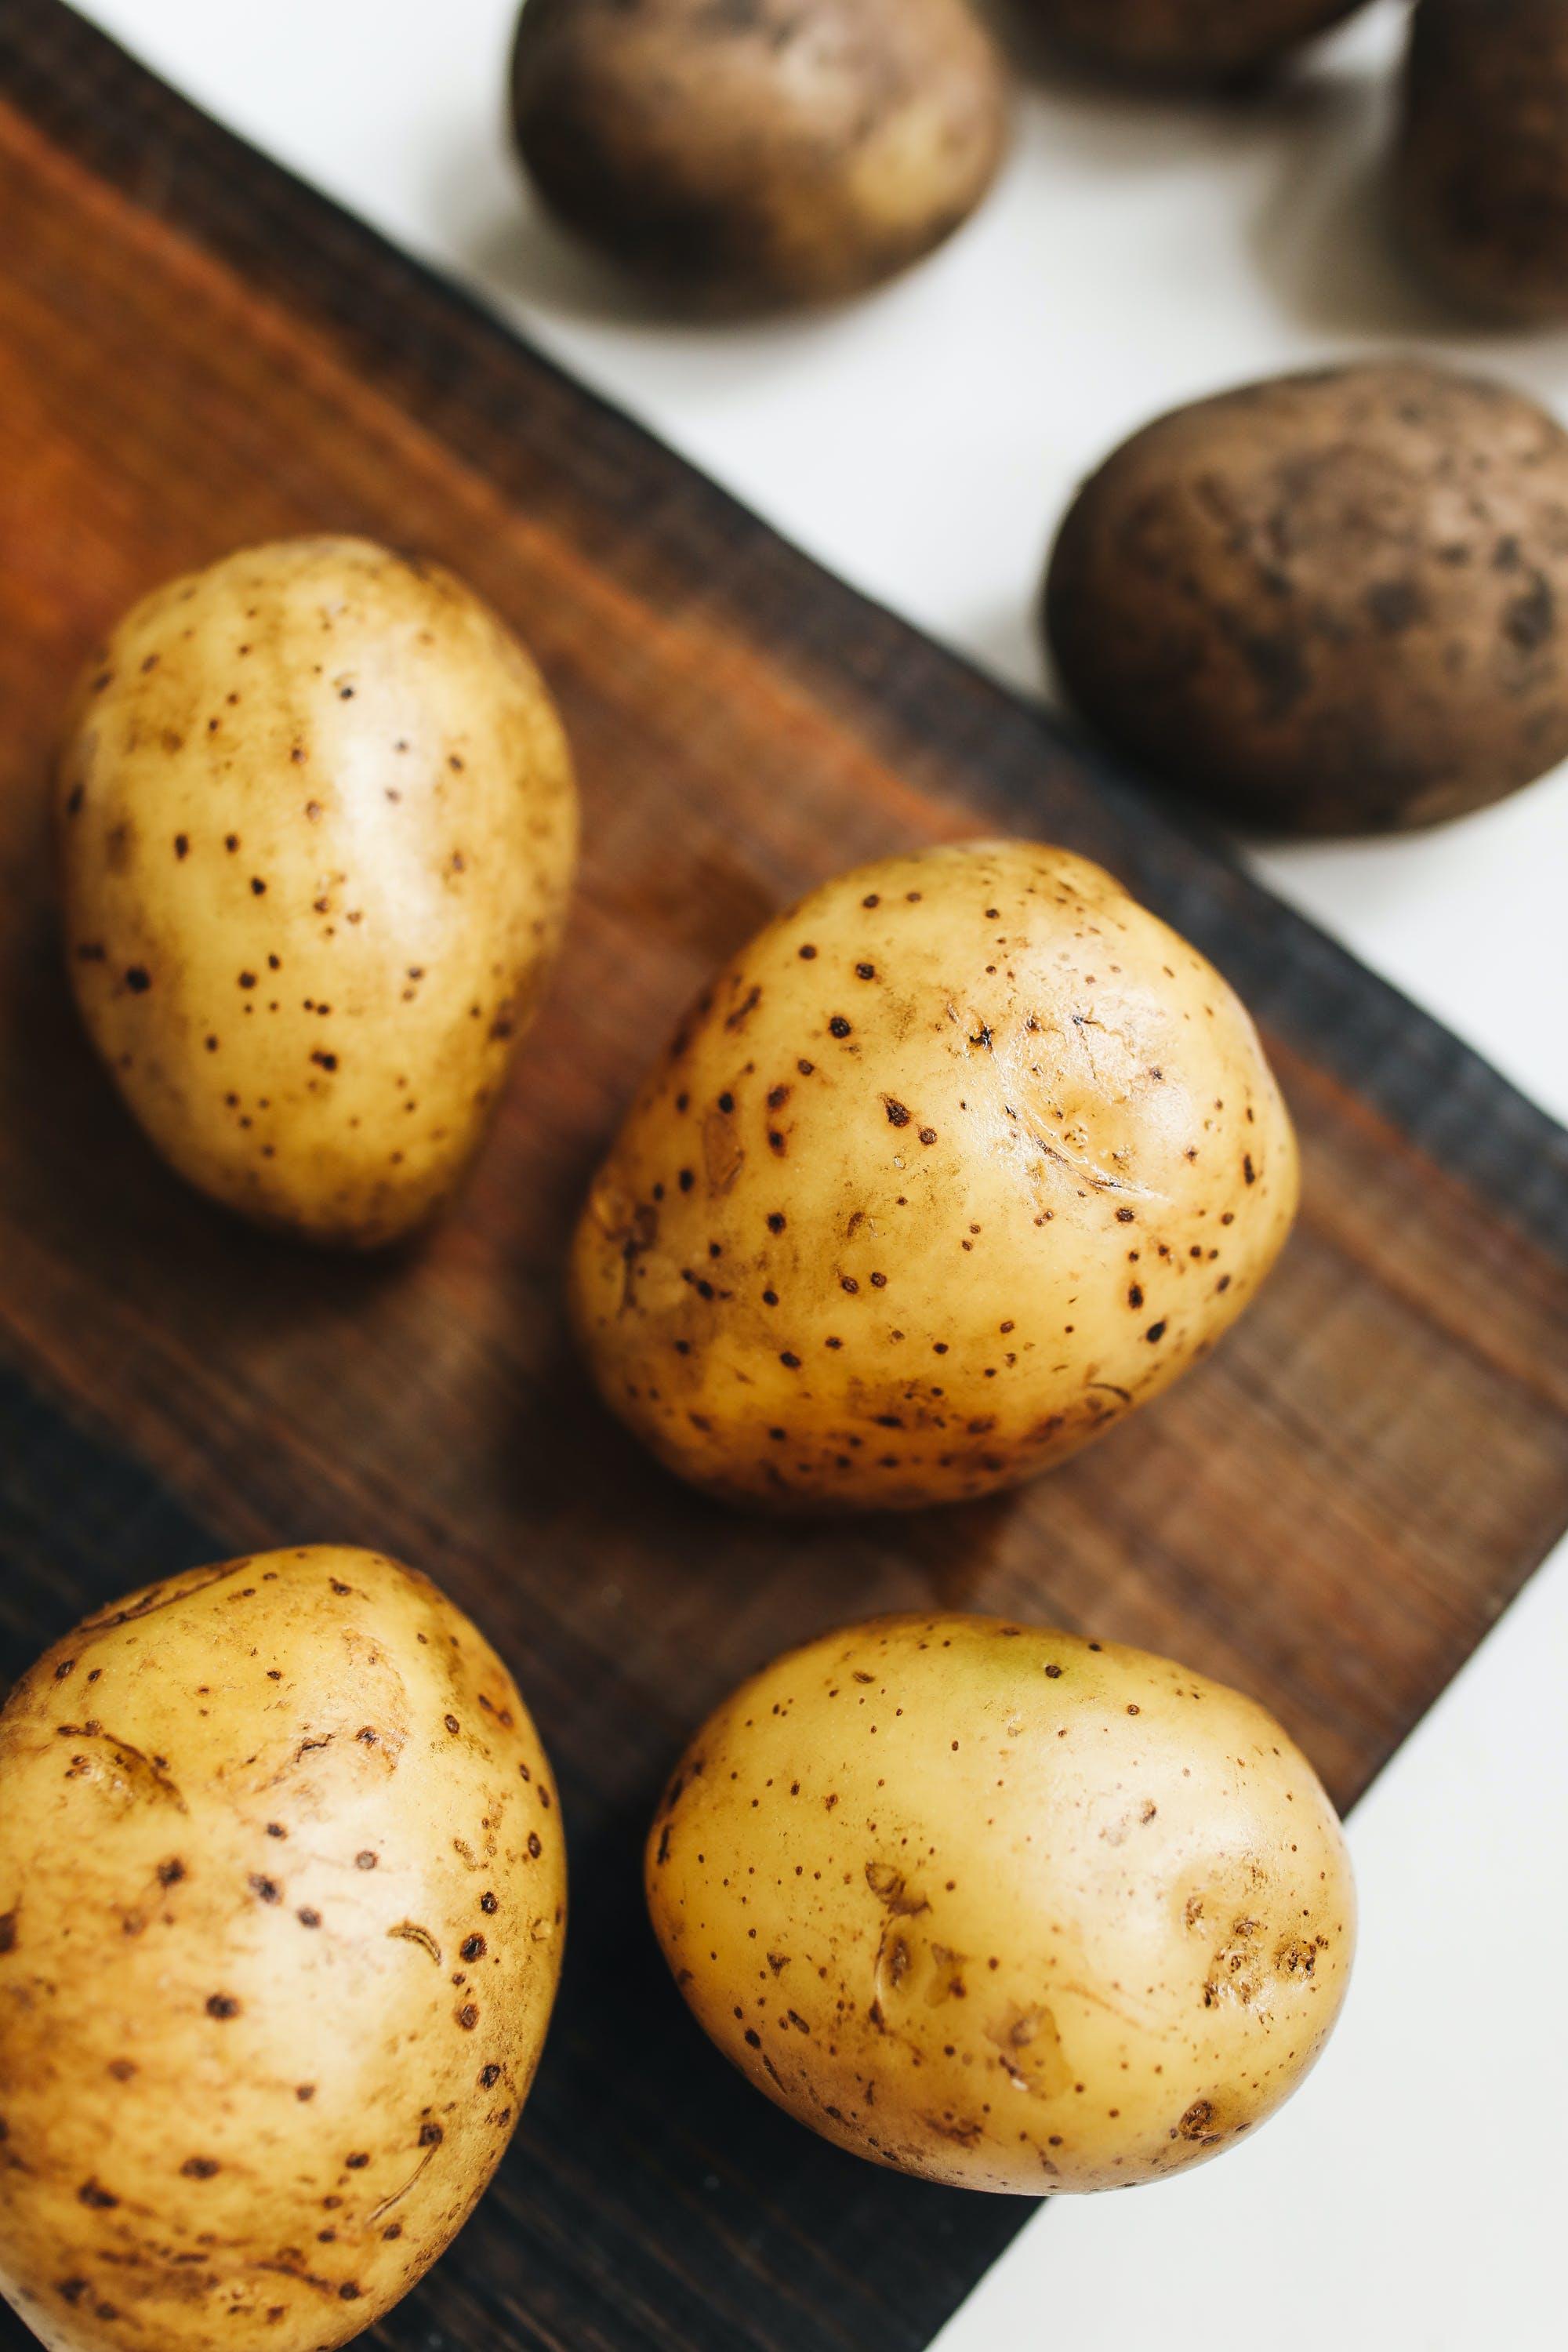 Can you eat potatoes with an upset stomach? 